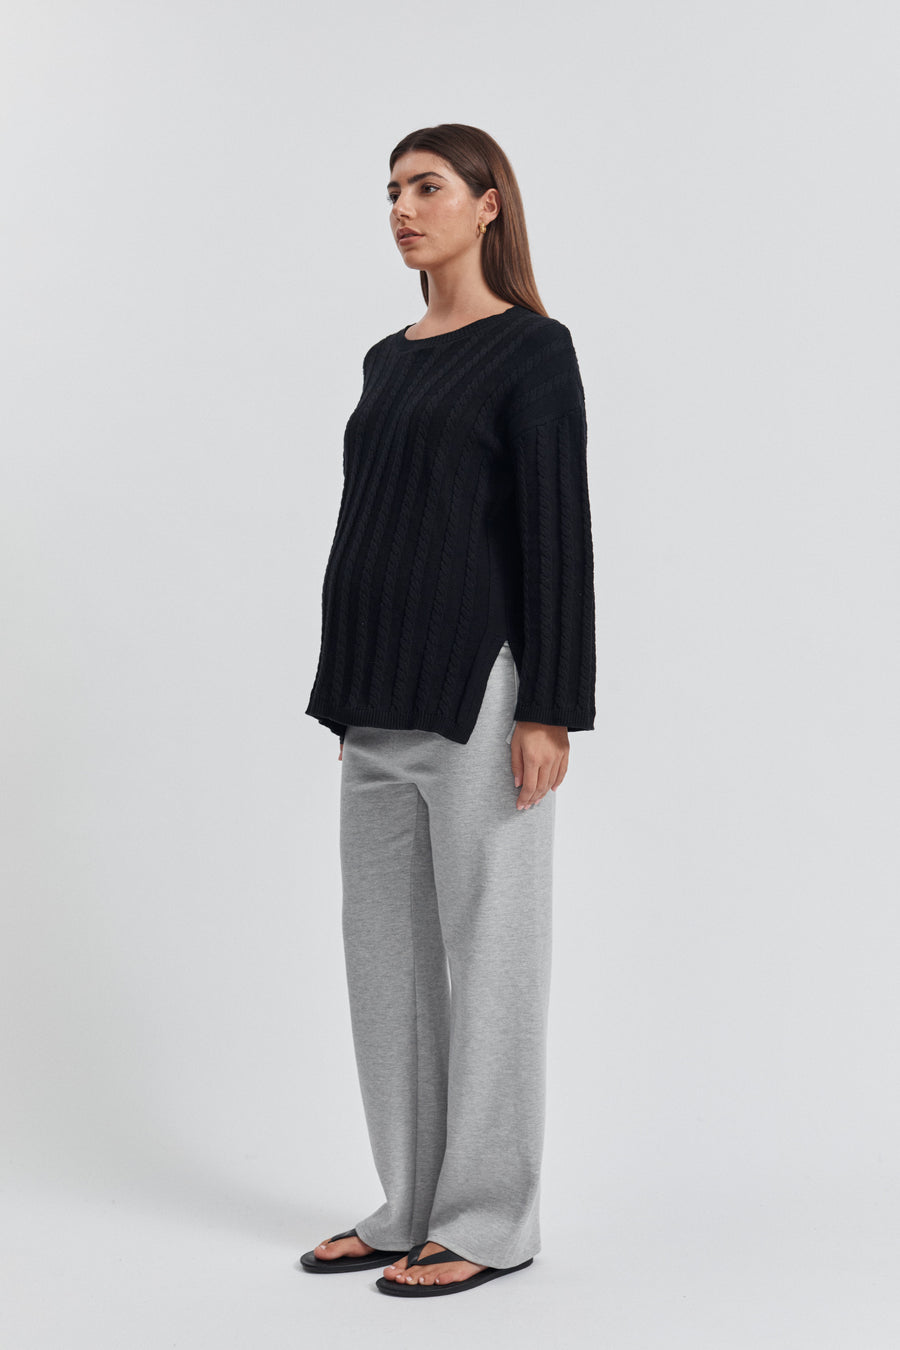 Maternity Cable Knit Jumper (Black) 5